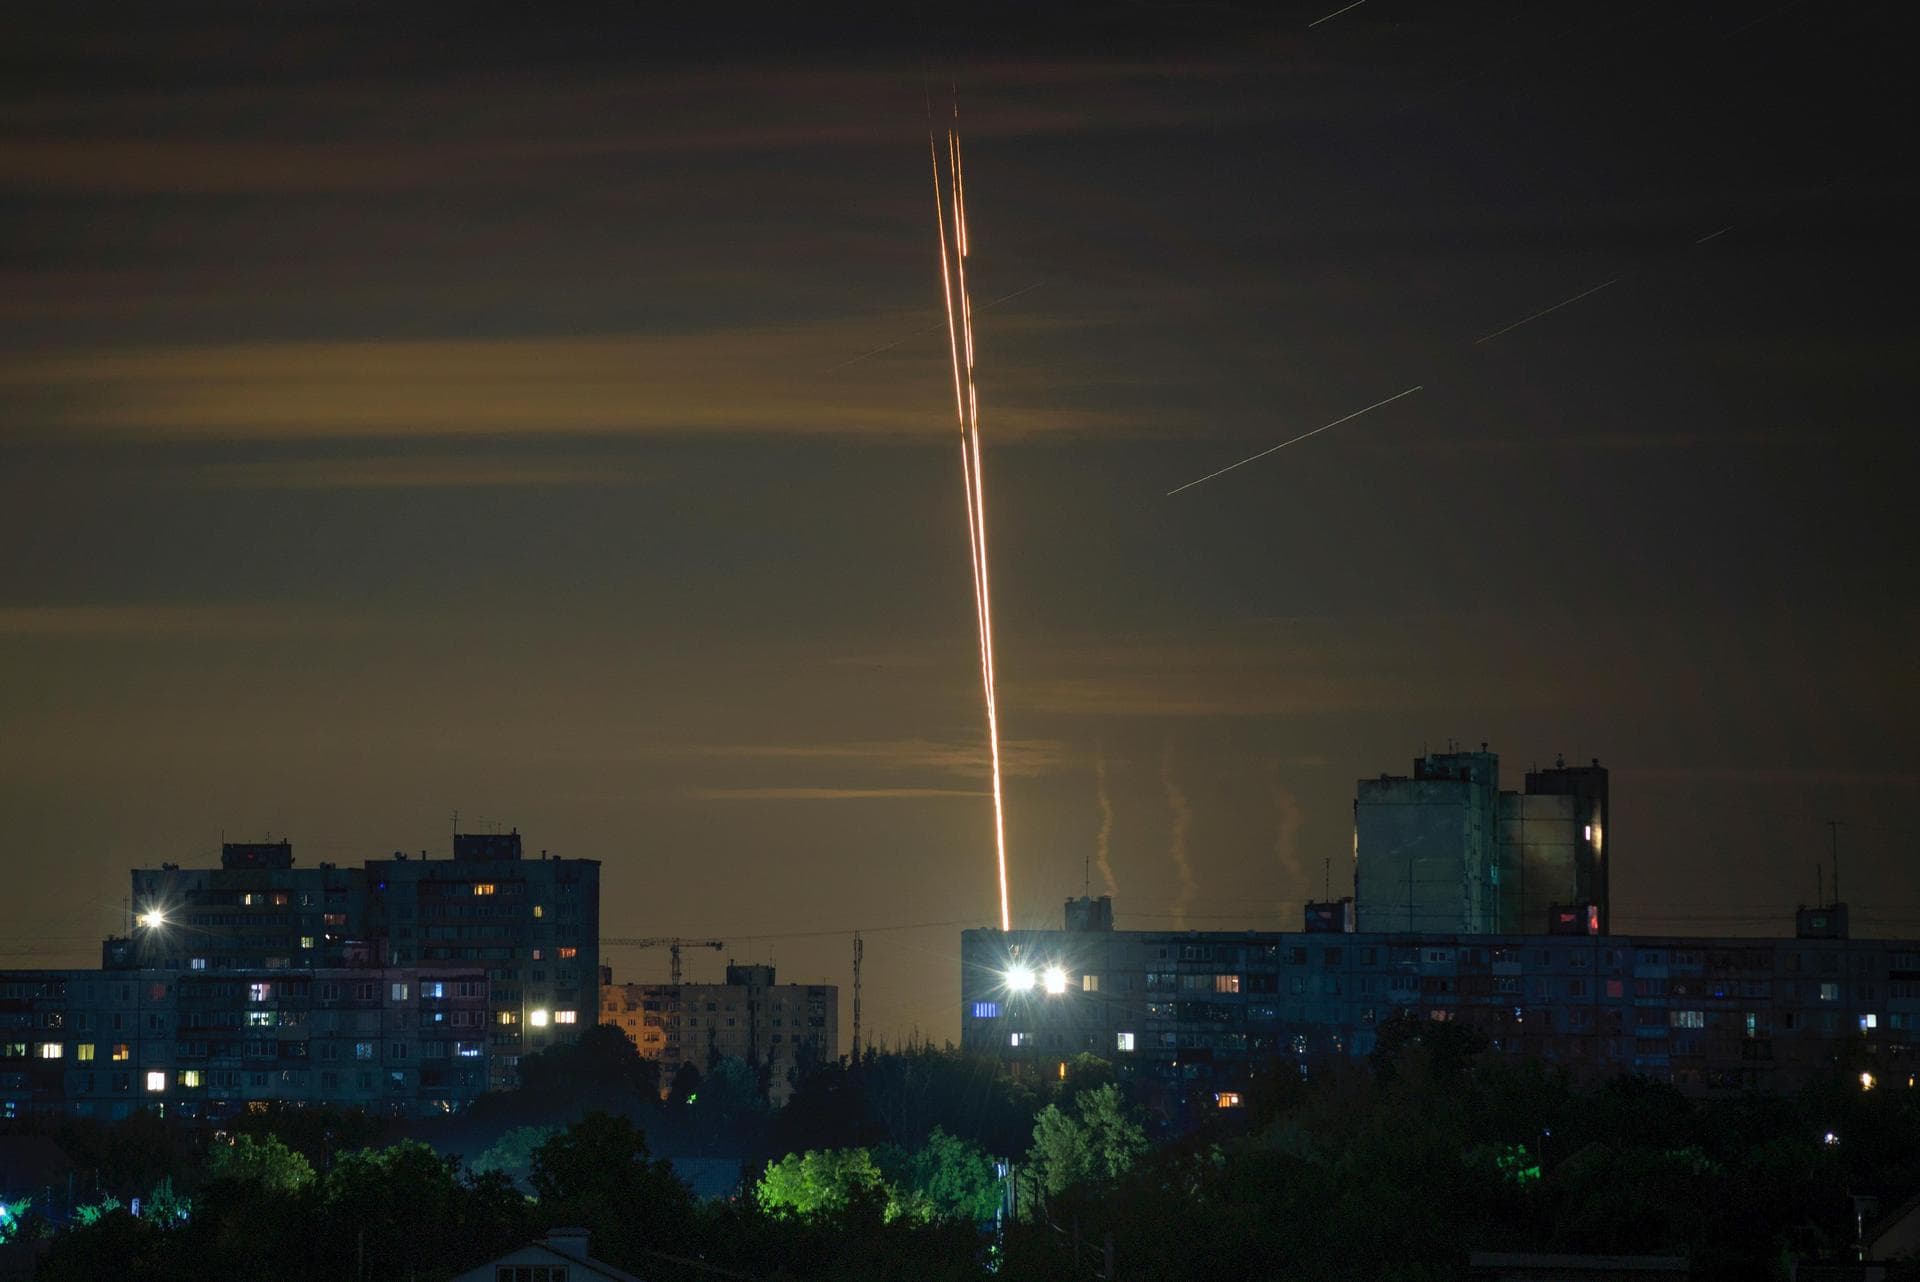 Russian rockets are launched against Ukraine from Russia's Belgorod region, as seen from Kharkiv